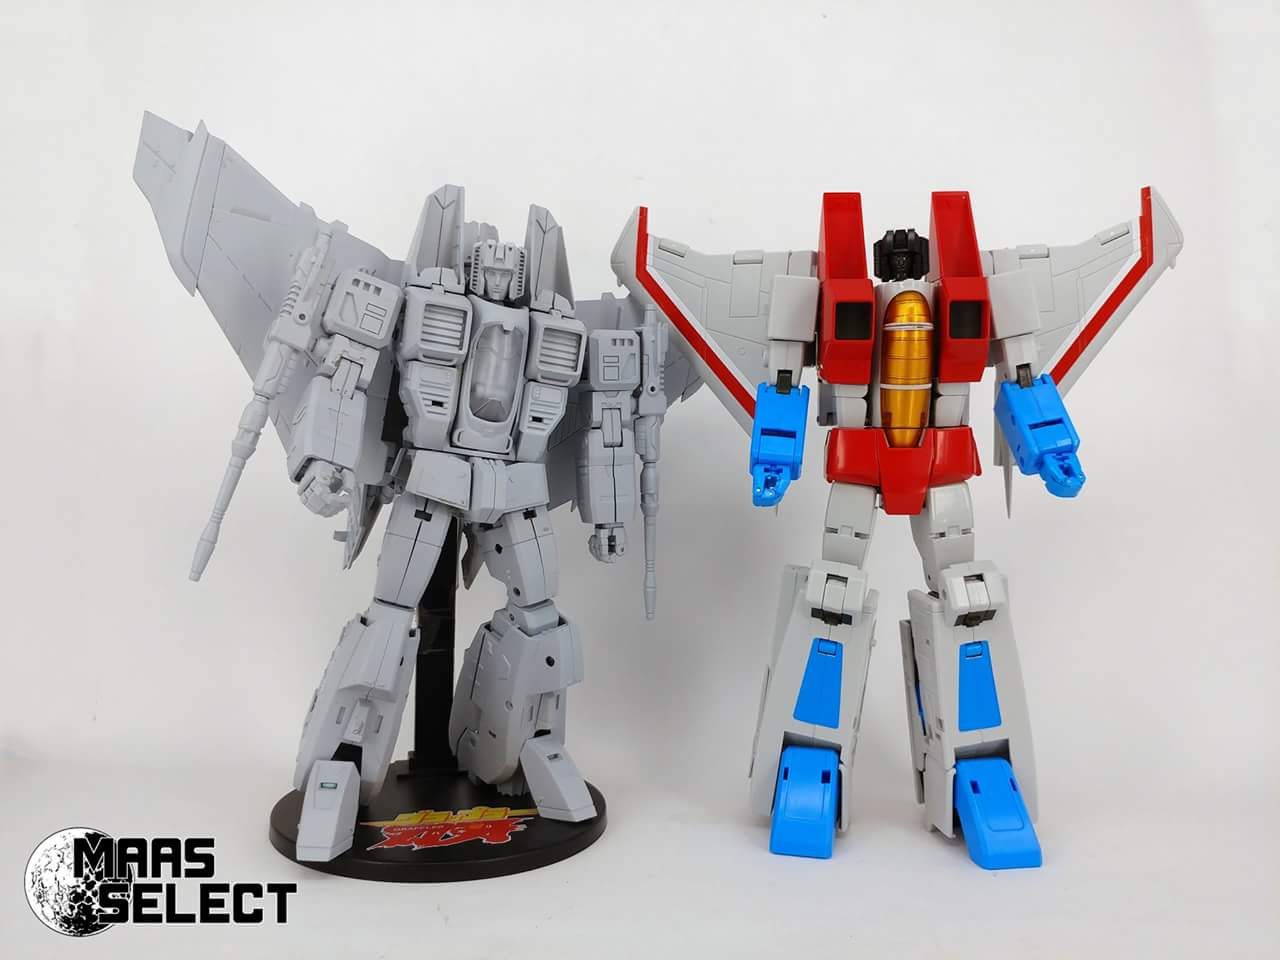 [MAAS Toys] Produit Tiers - Gamme "Cybertech Series" (mode Cybertronien G1) + Gee Too (G2) - Page 2 YDT8LA5T_o